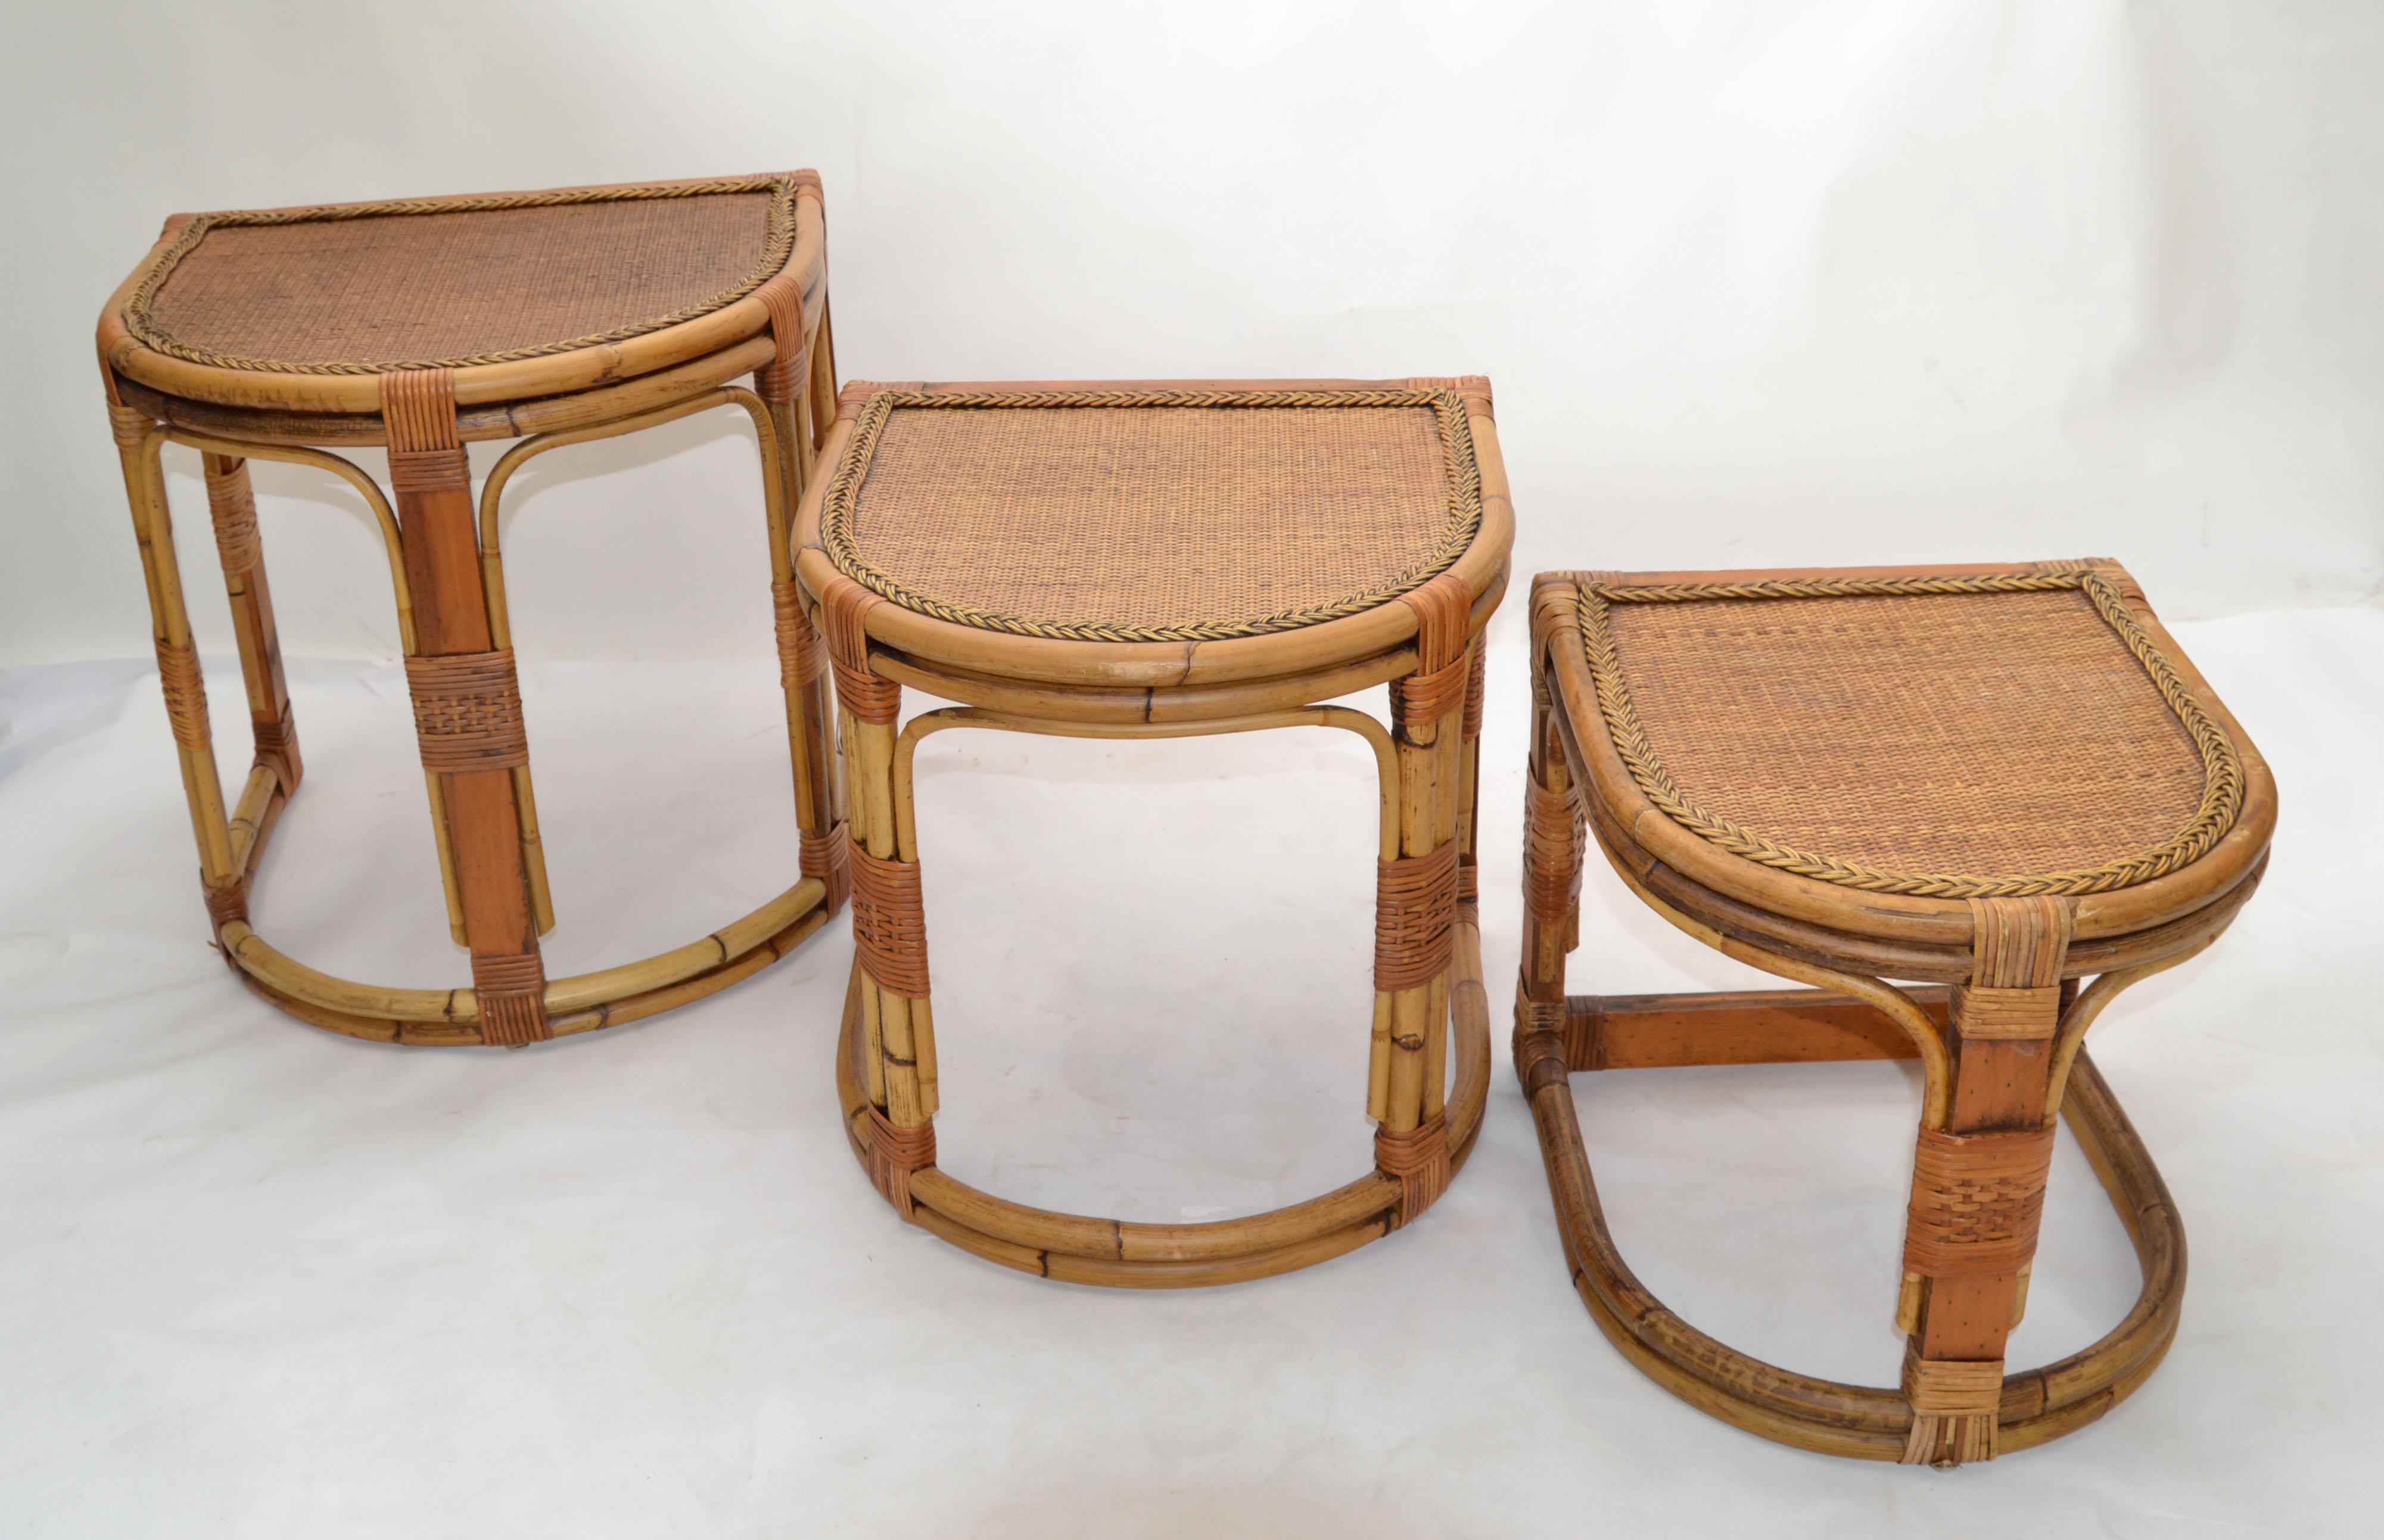 Late 20th Century Semi-Circle Bamboo & Cane Nesting Tables / Stacking Tables Handcrafted, Set of 3 For Sale